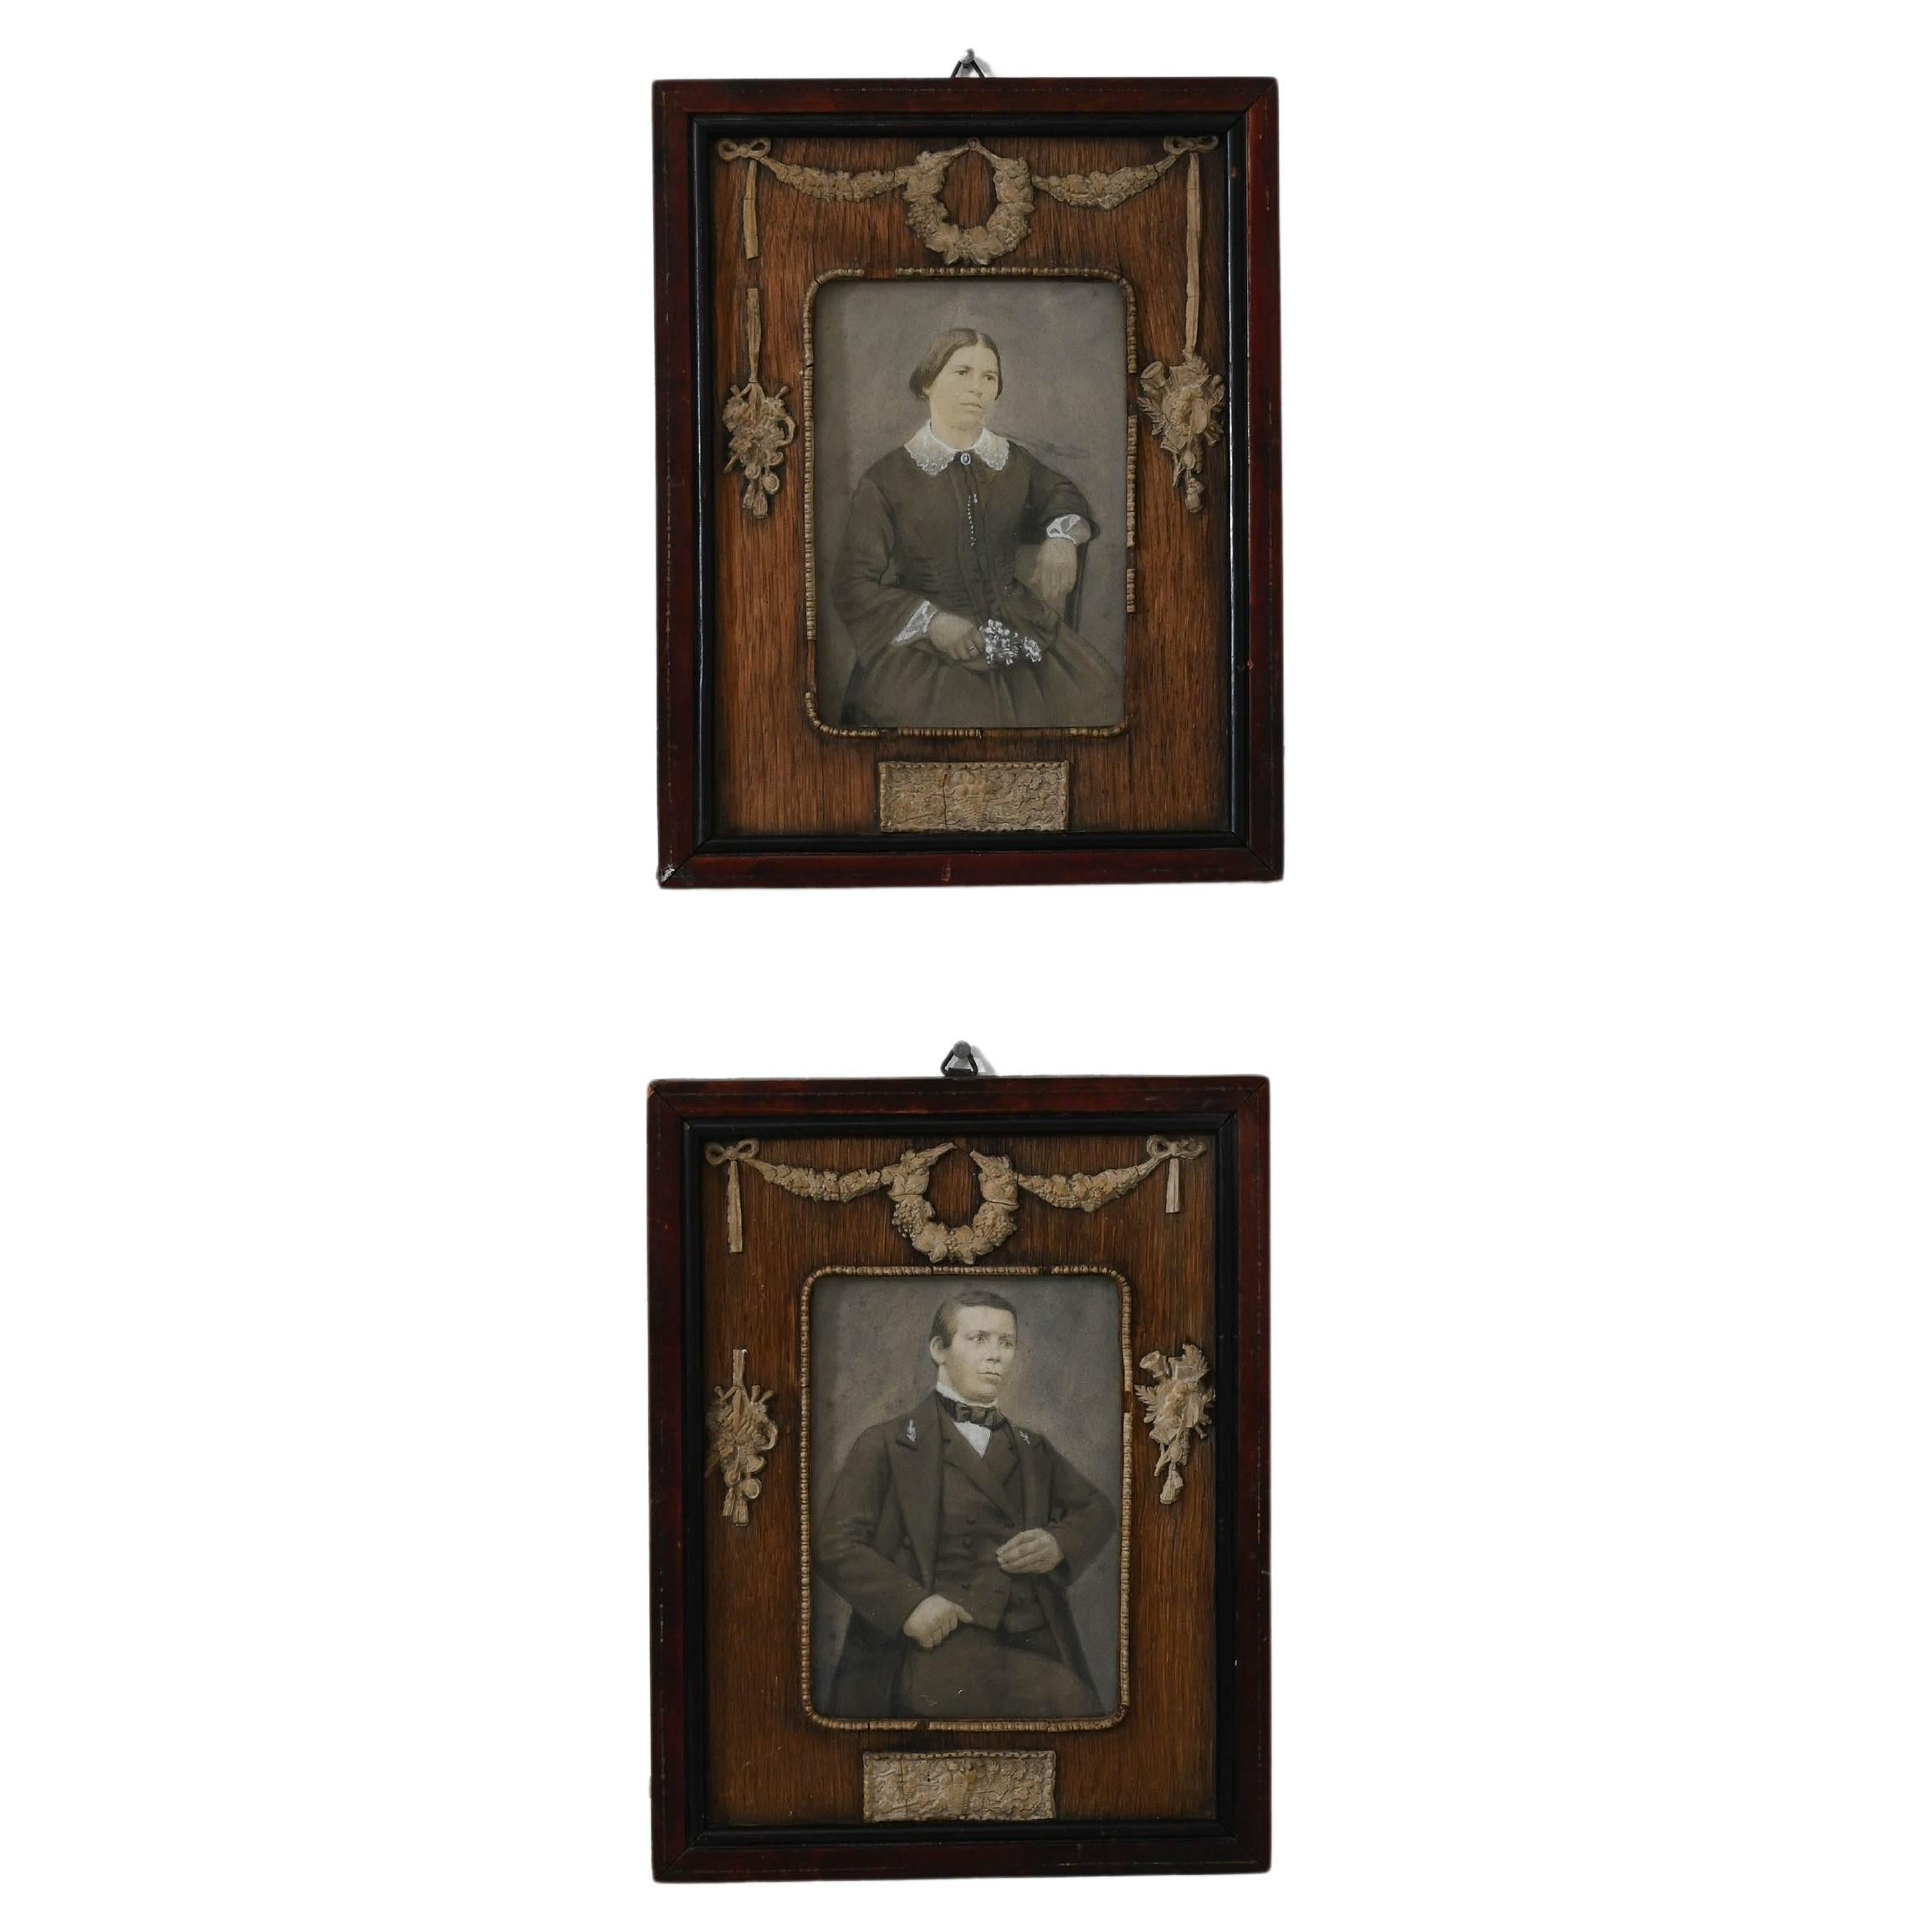 Pair of 19th Century French Artworks with Wooden Frame